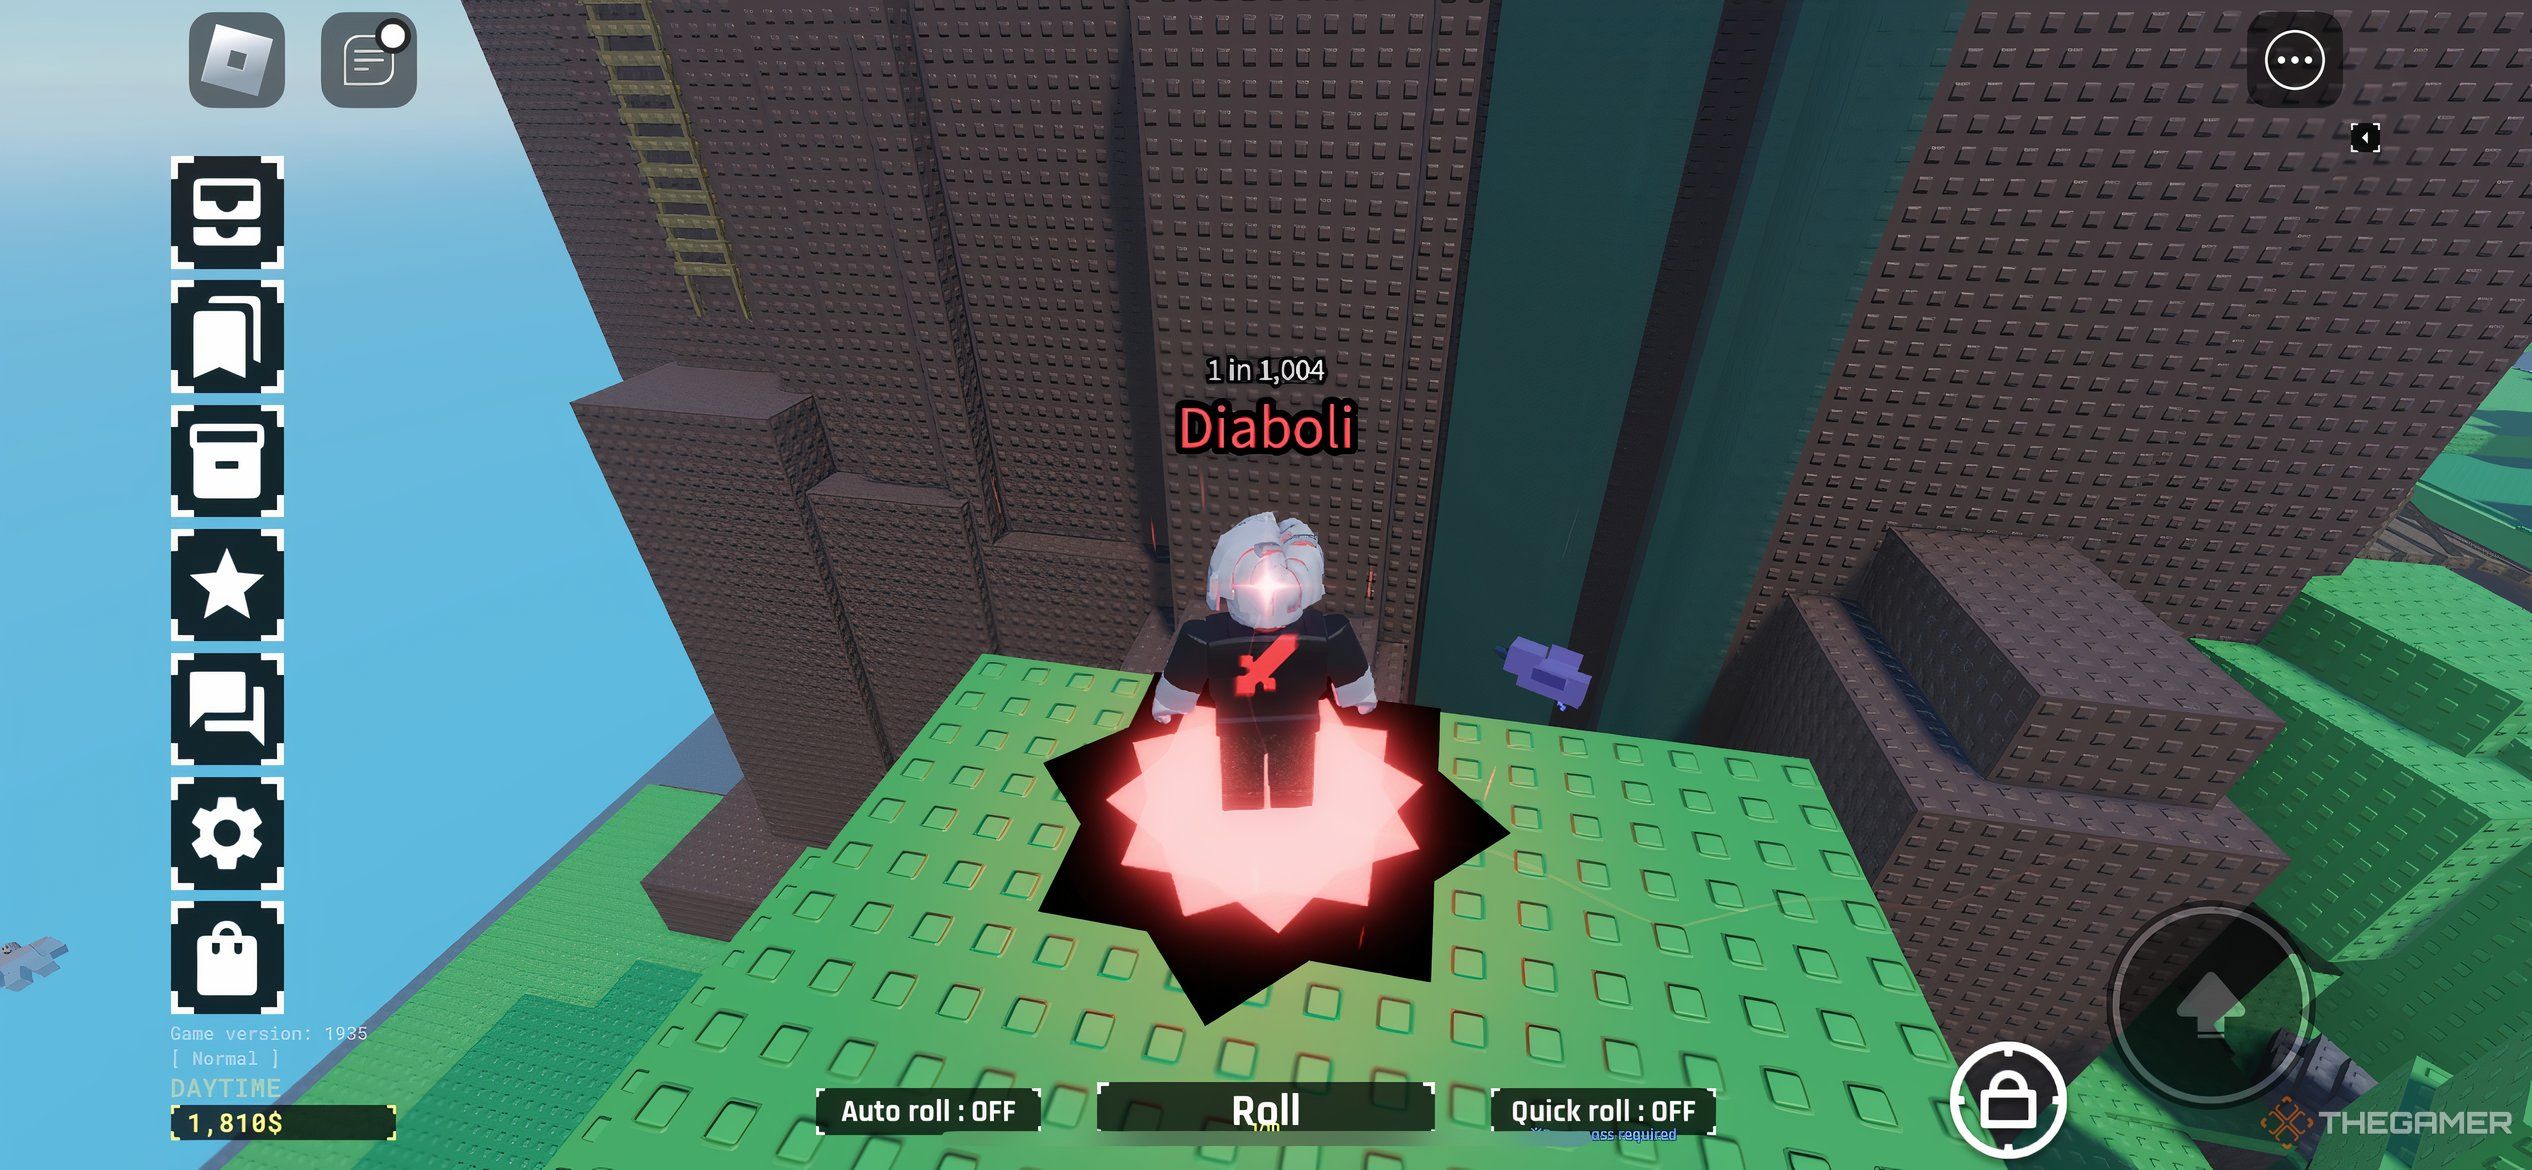 Jump towards the waterfall to reach the ledge in Roblox: Sol's RNG.